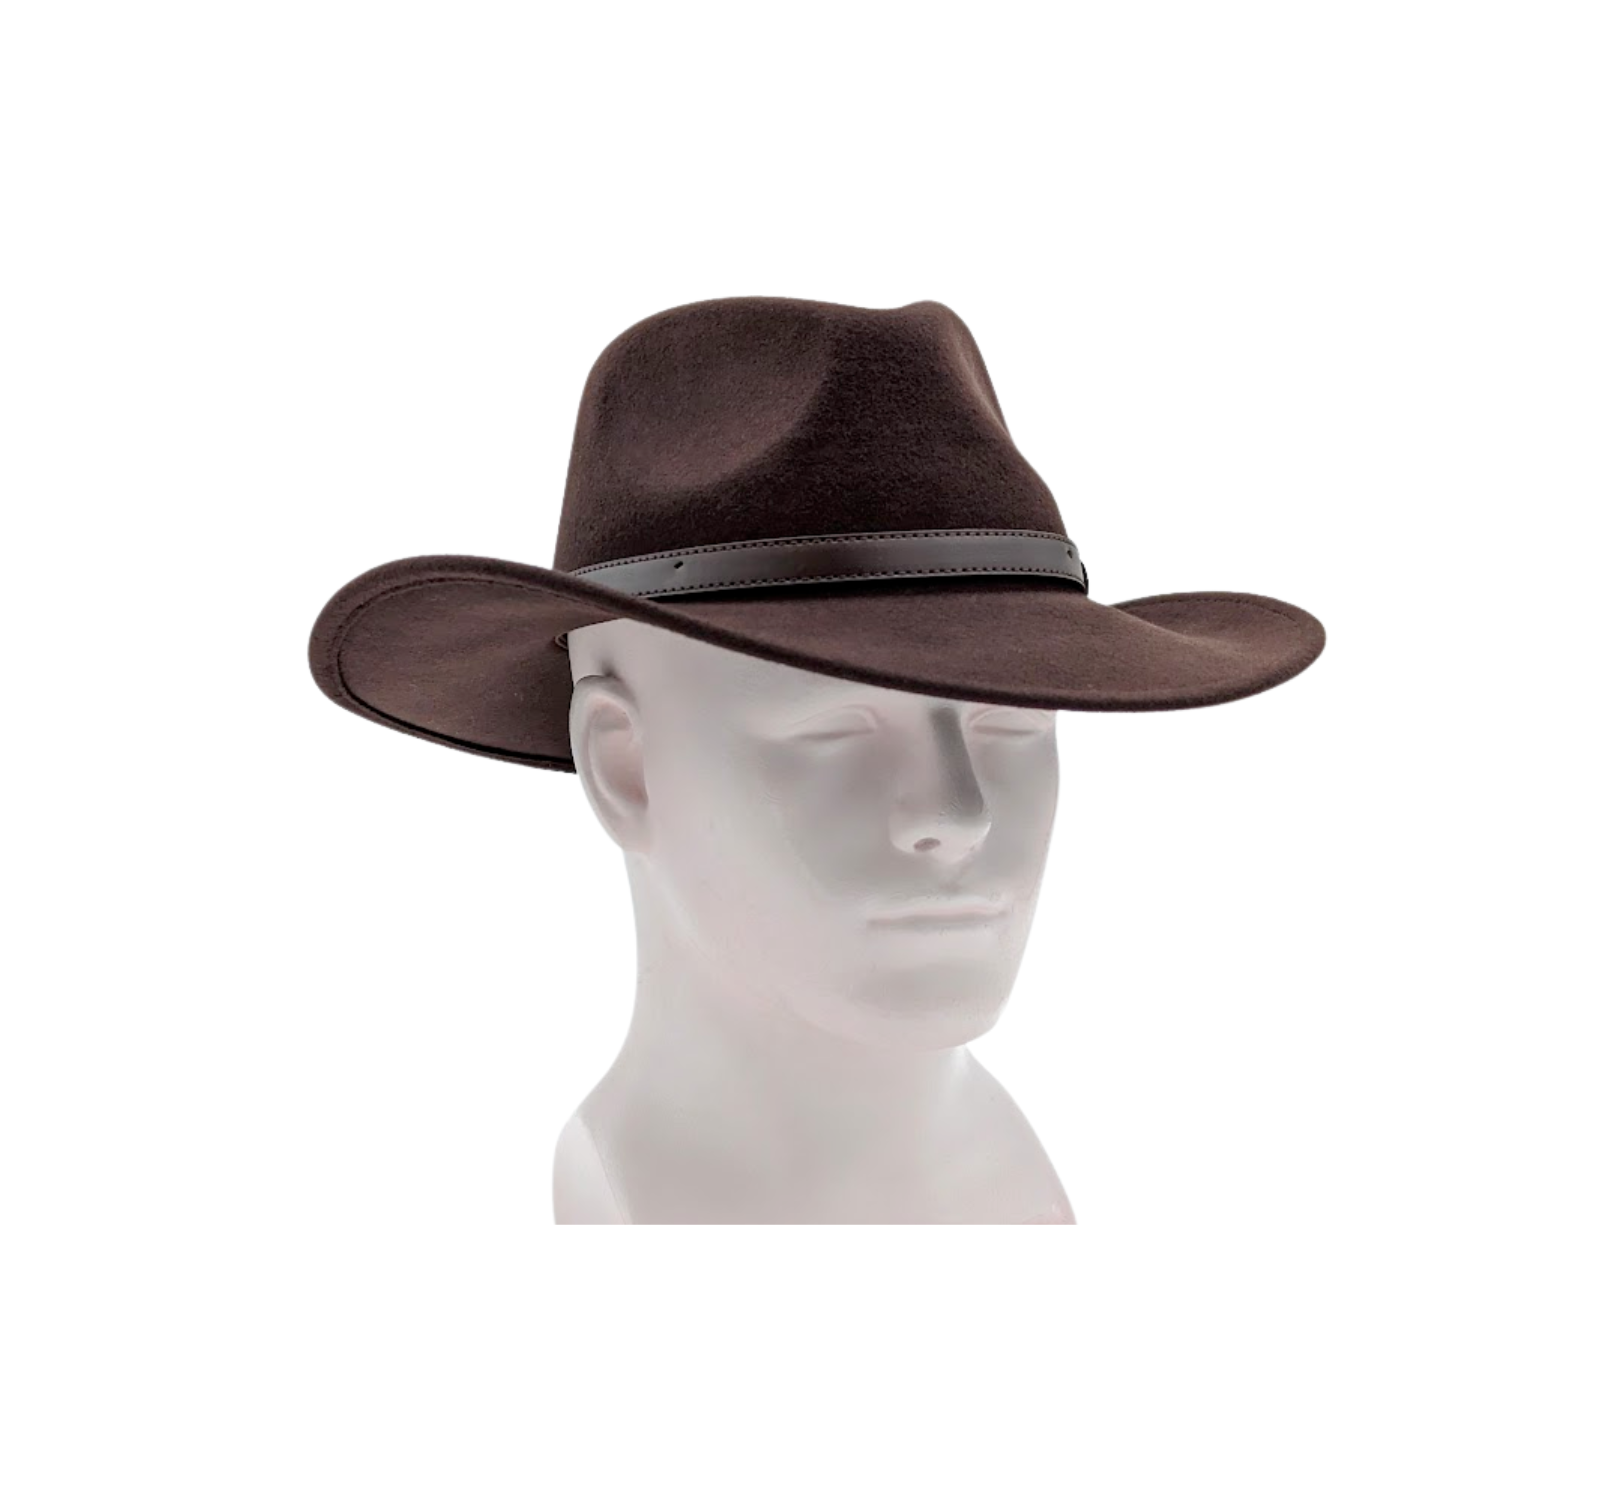 Cowboy Hat by Stansmore